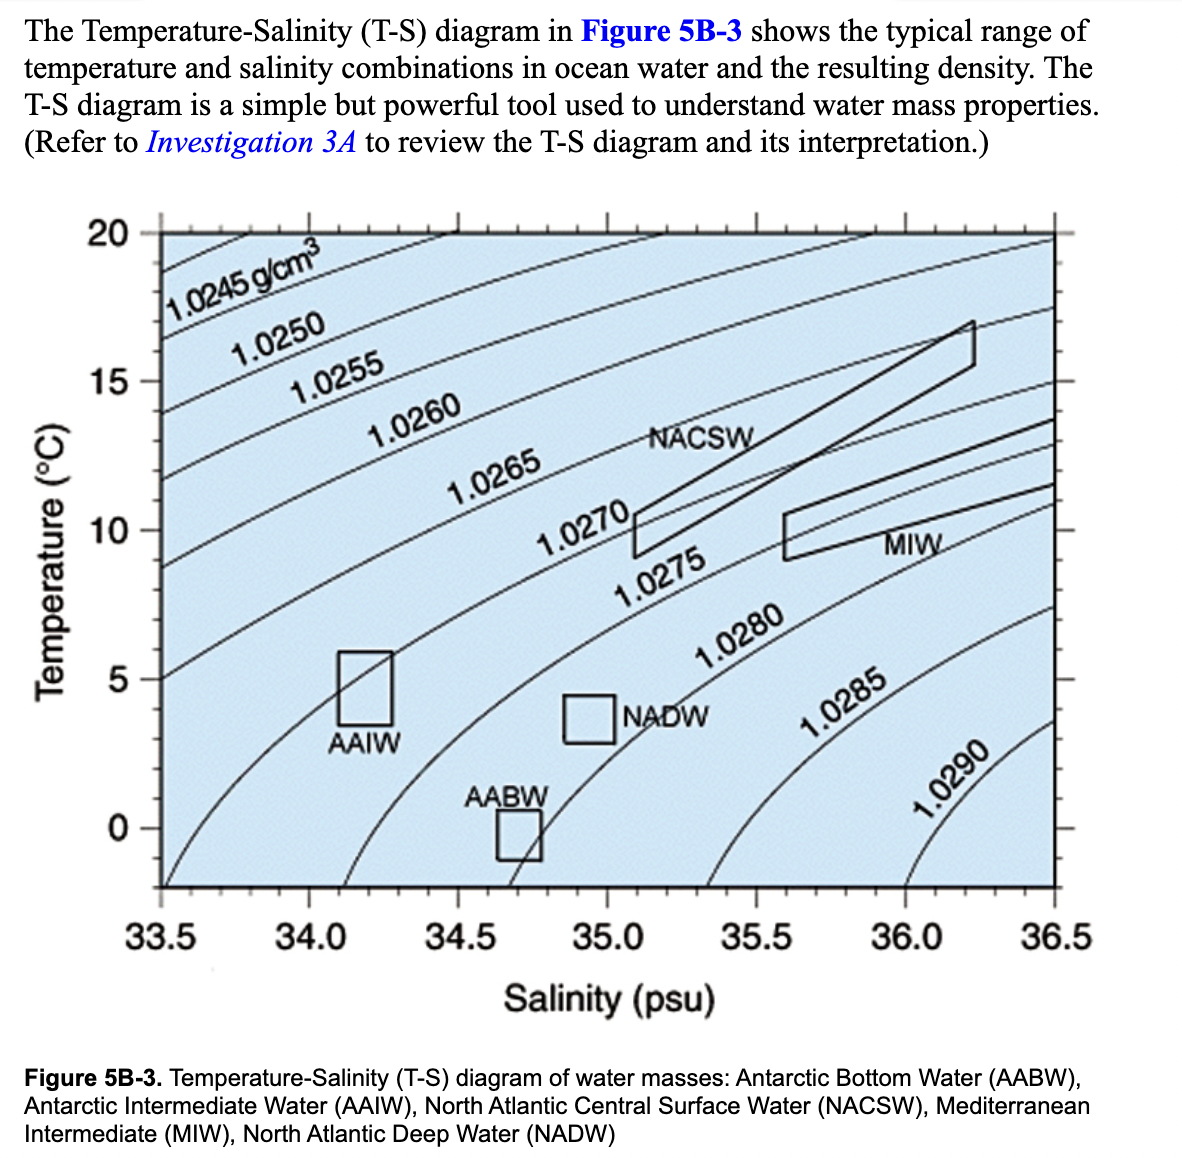 The Temperature-Salinity (T-S) diagram in Figure 5B-3 shows the typical range of
temperature and salinity combinations in ocean water and the resulting density. The
T-S diagram is a simple but powerful tool used to understand water mass properties.
(Refer to Investigation 3A to review the T-S diagram and its interpretation.)
20
1.0245 g/cm
15
1.0250
1.0255
1.0260
NACSW
10
1.0265
1.0270,
MIW
1.0275
1.0280
ONADW
AAIW
1.0285
AABW
33.5
34.0
34.5
35.0
35.5
36.0
Salinity (psu)
Figure 5B-3. Temperature-Salinity (T-S) diagram of water masses: Antarctic Bottom Water (AABW),
36.5
Antarctic Intermediate Water (AAIW), North Atlantic Central Surface Water (NACSW), Mediterranean
Intermediate (MIW), North Atlantic Deep Water (NADW)
Temperature (°C)
1.0290
